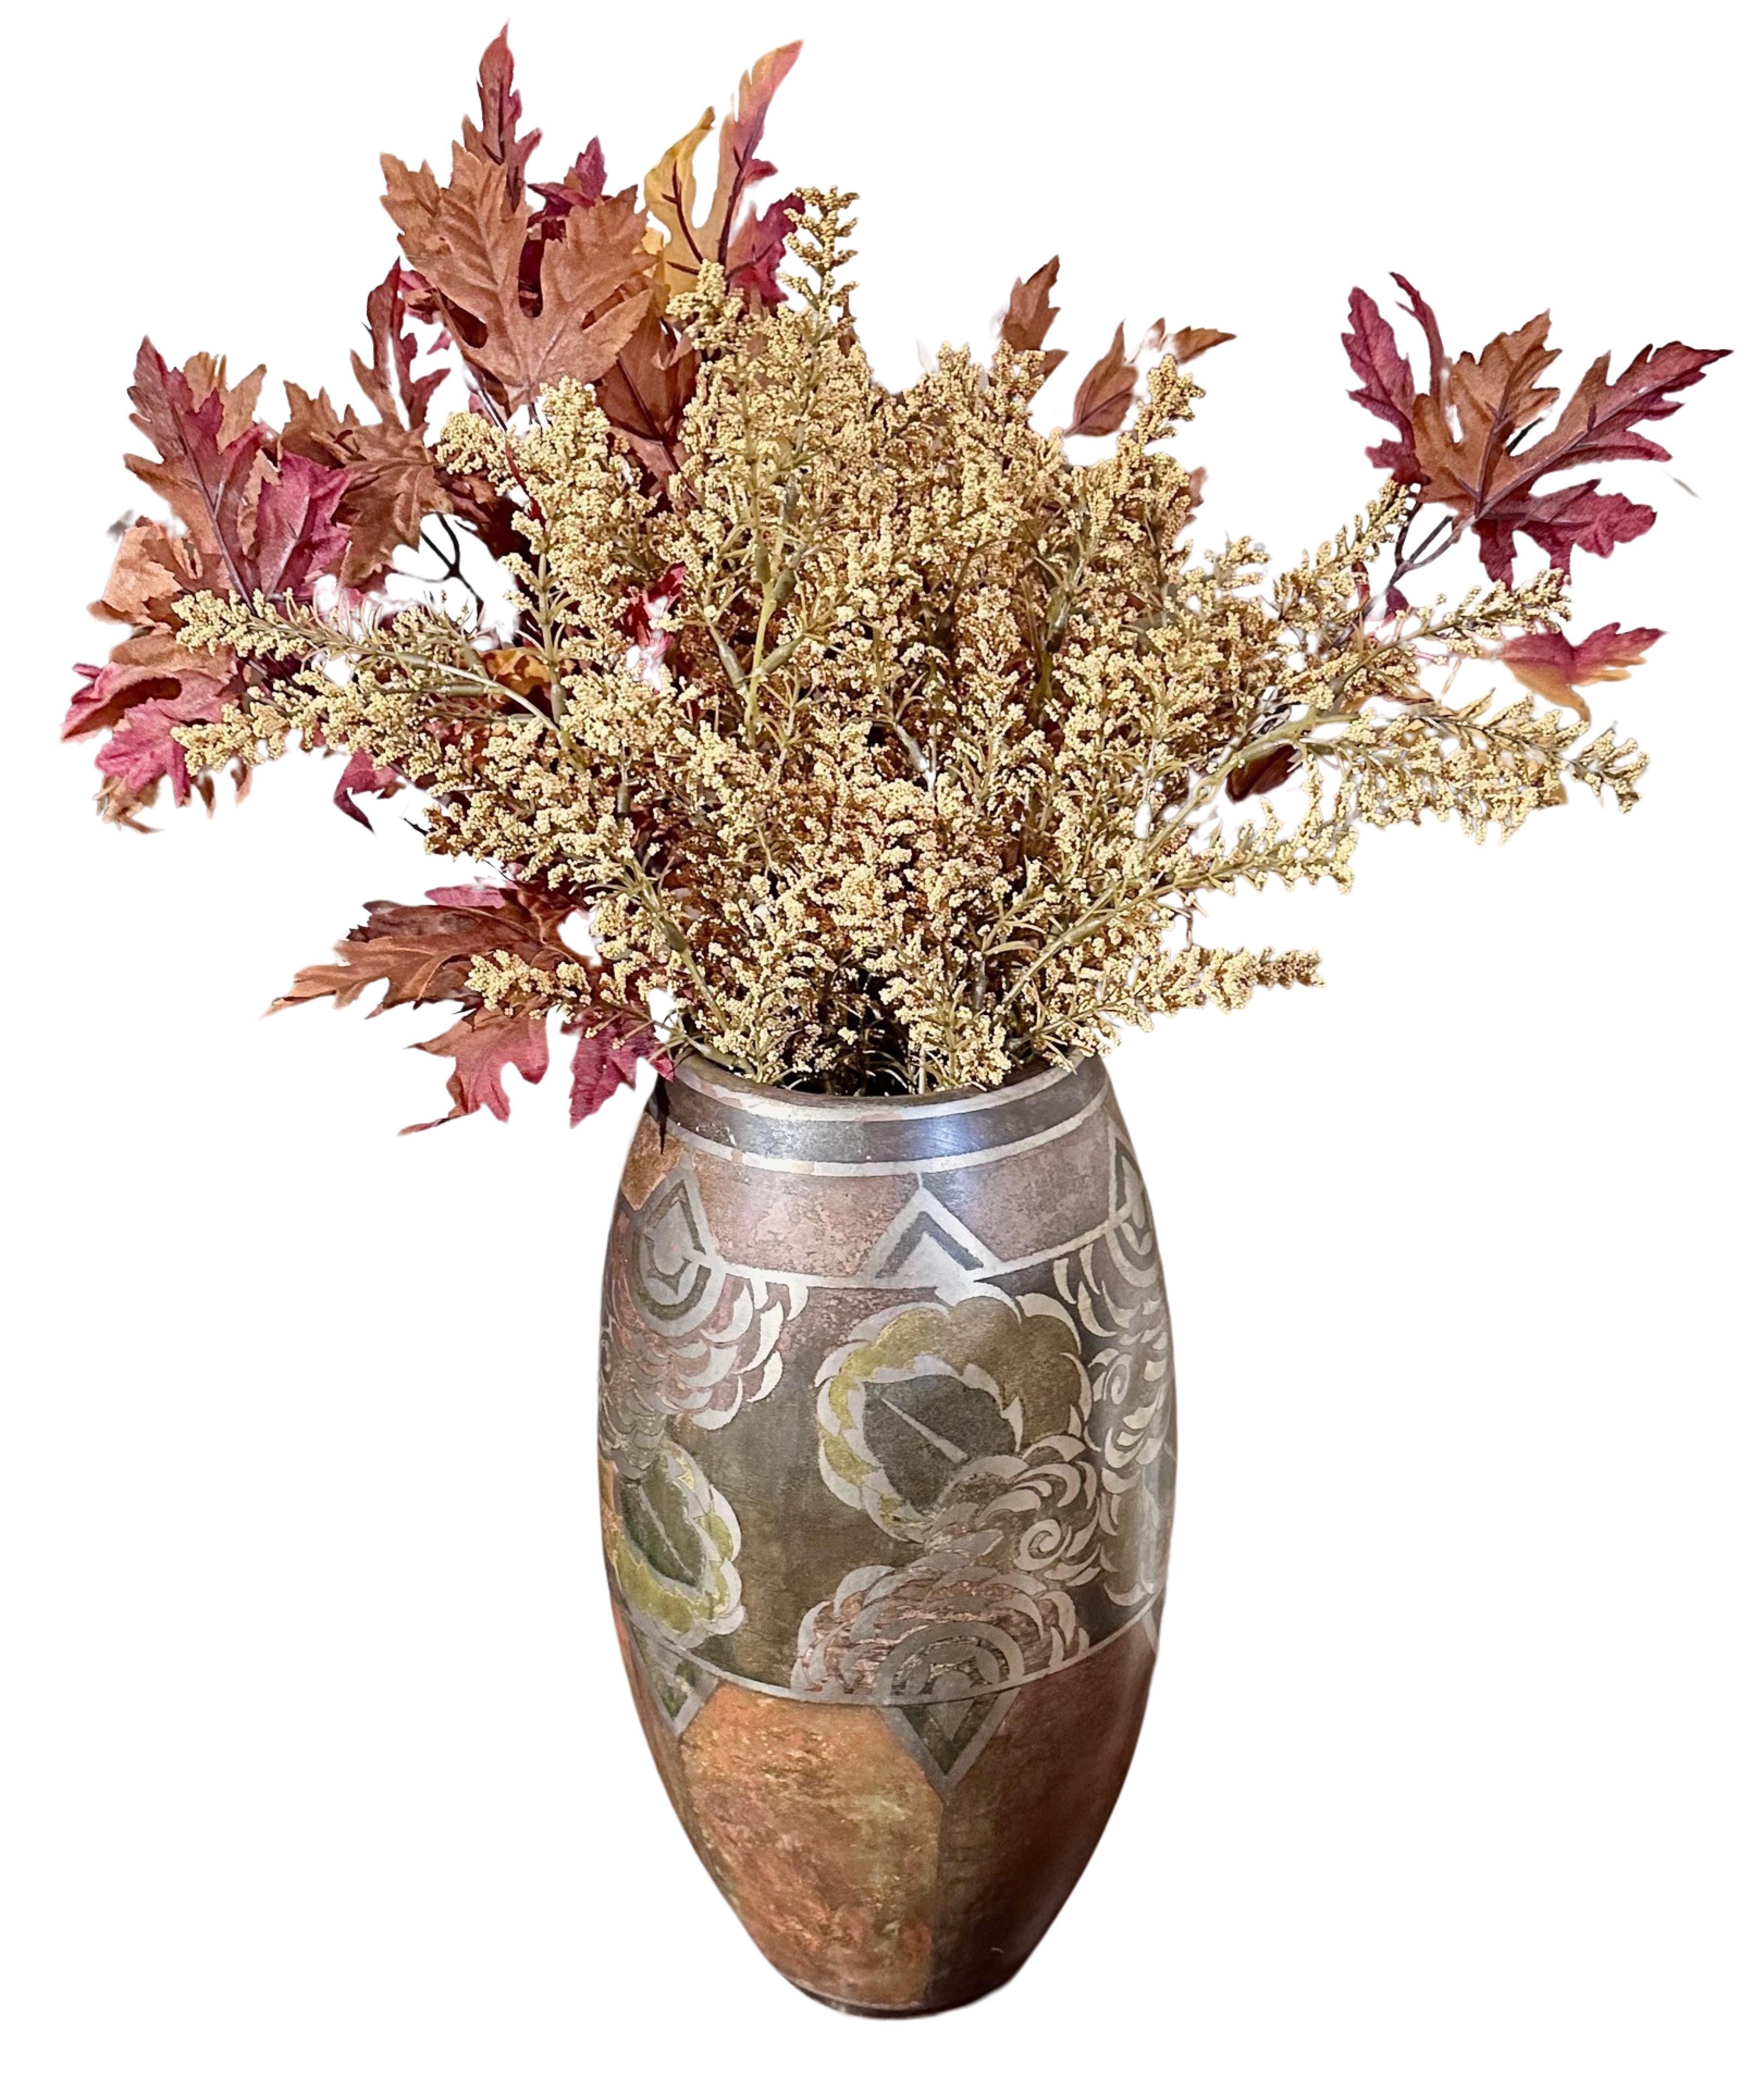 Dinanderie Vase by French artist Jean Dunand..This is a rare and unusual vase with a combination of abstract floral and geometric images. The multi-layer patina gives this vase a very unique style.   There is a variety of textures with tones of